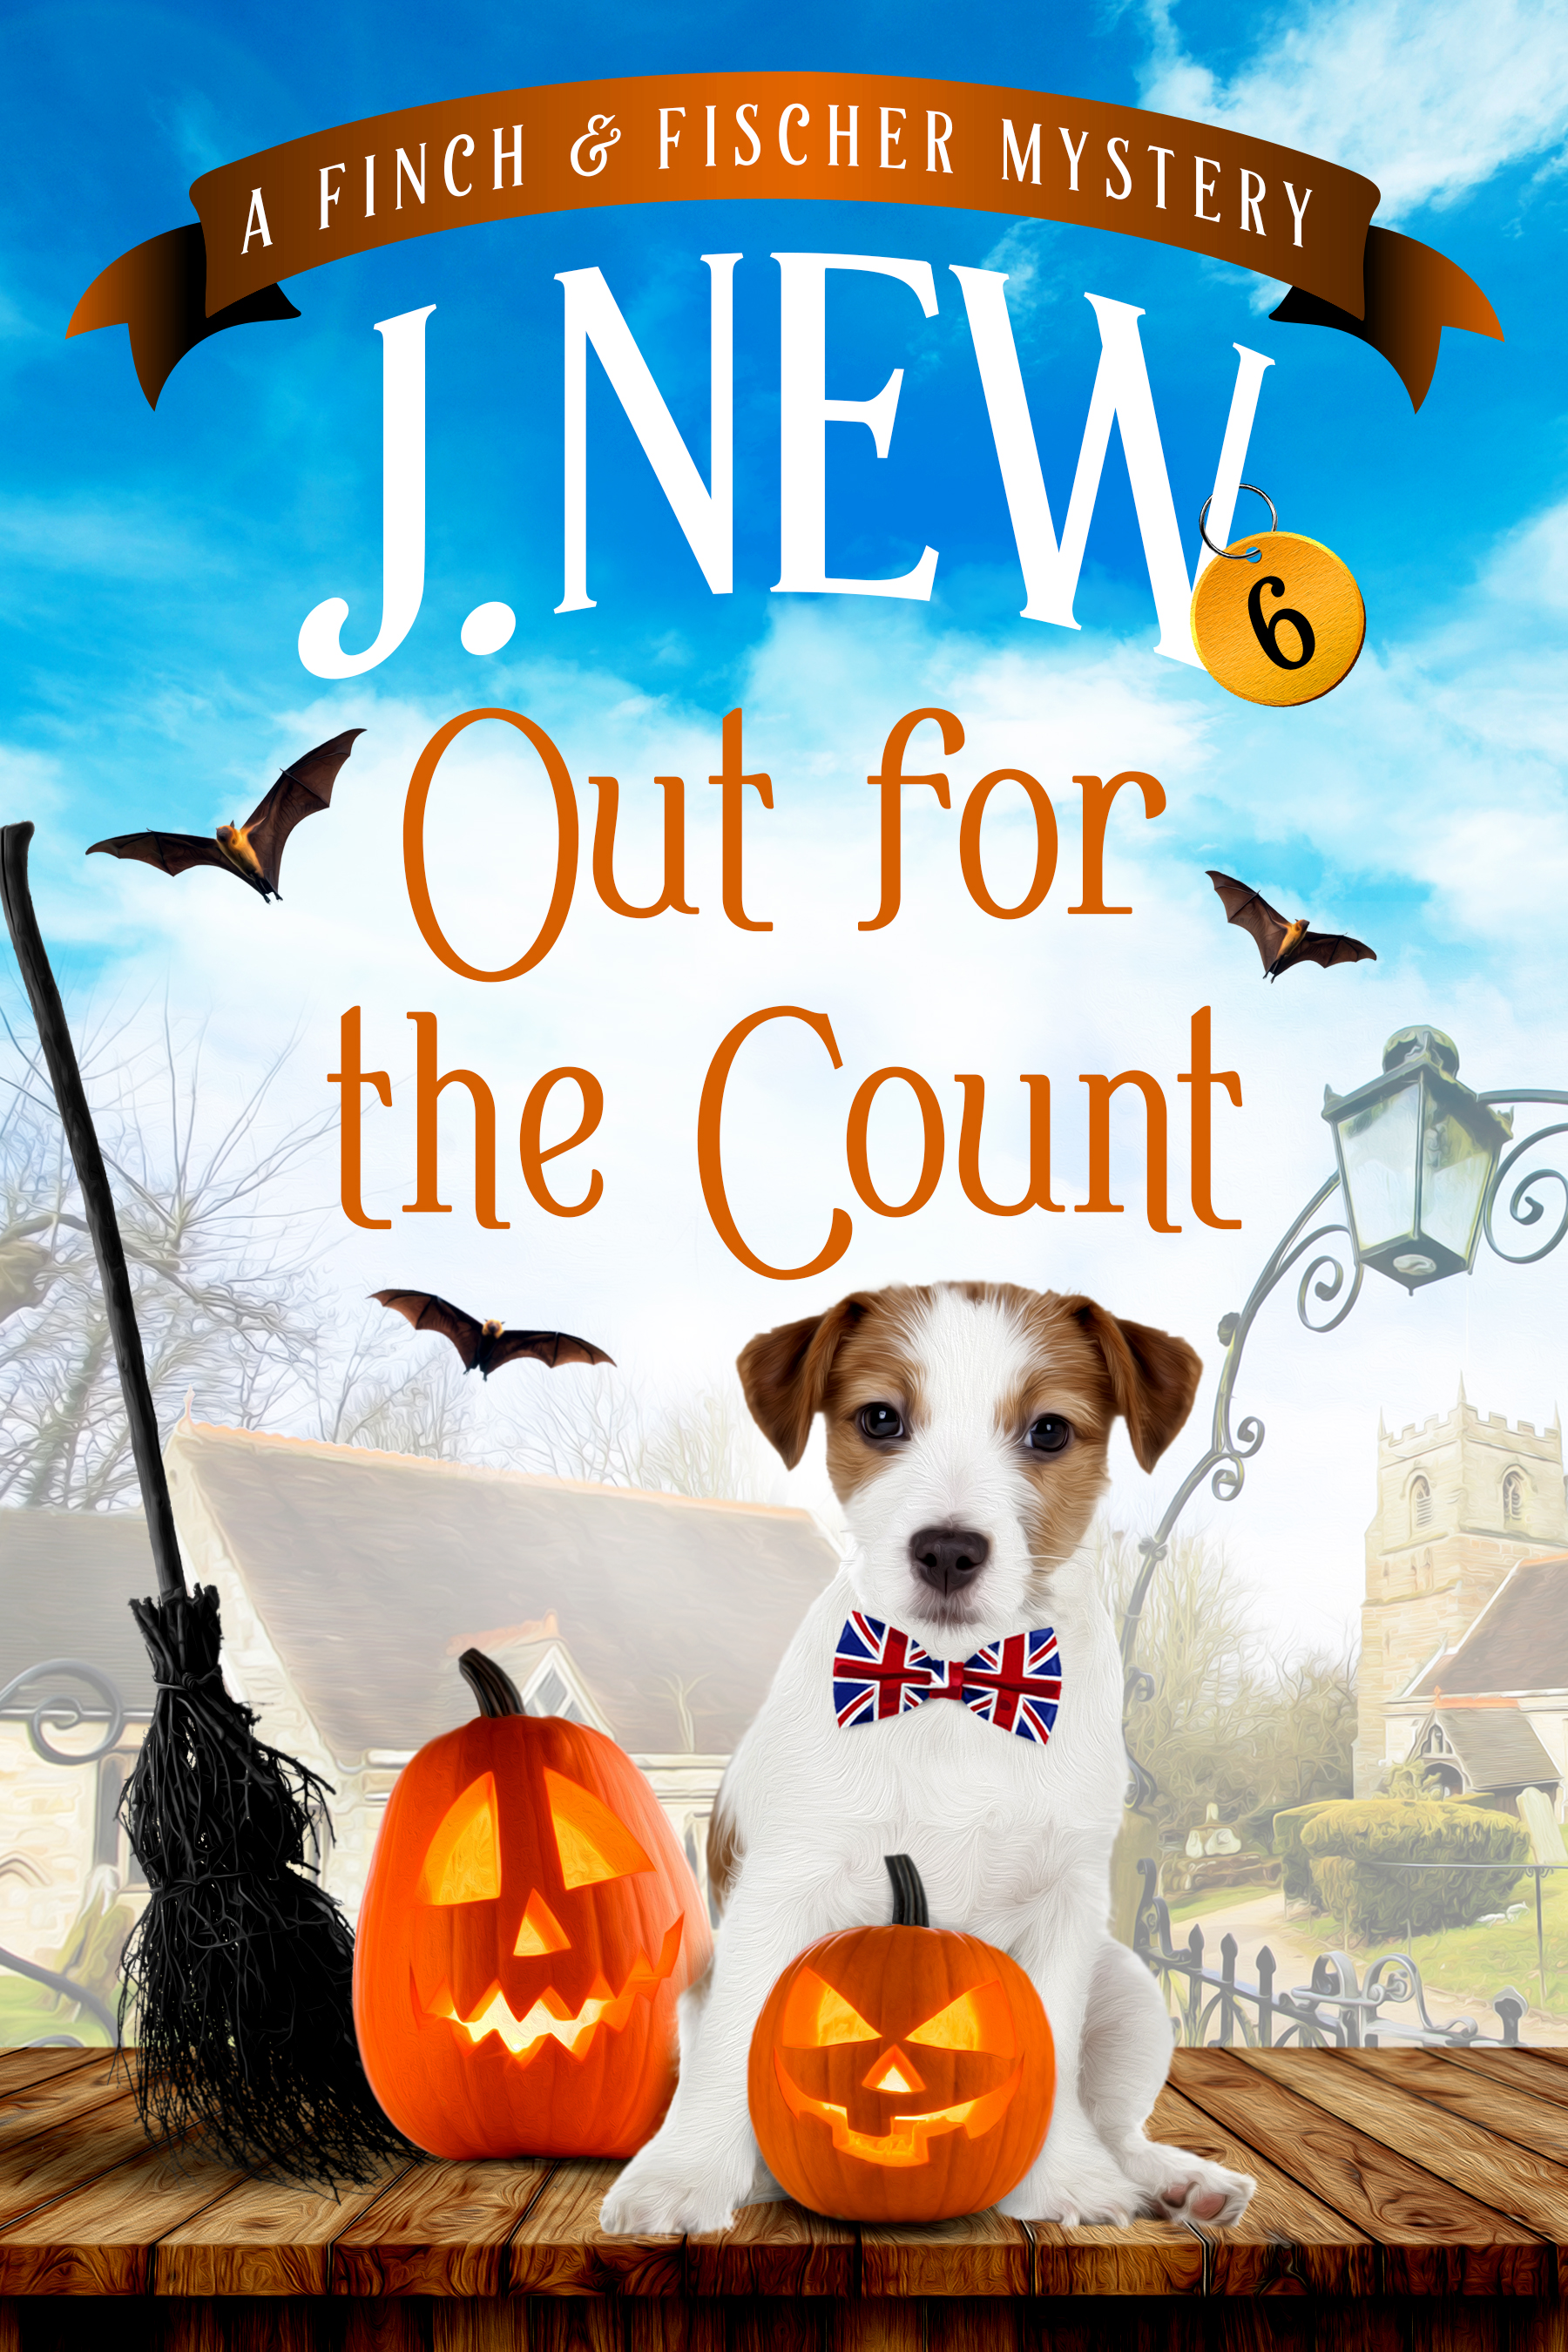 Out for the Count book 6 in the popular Finch and Fischer British cozy mystery series by J. New